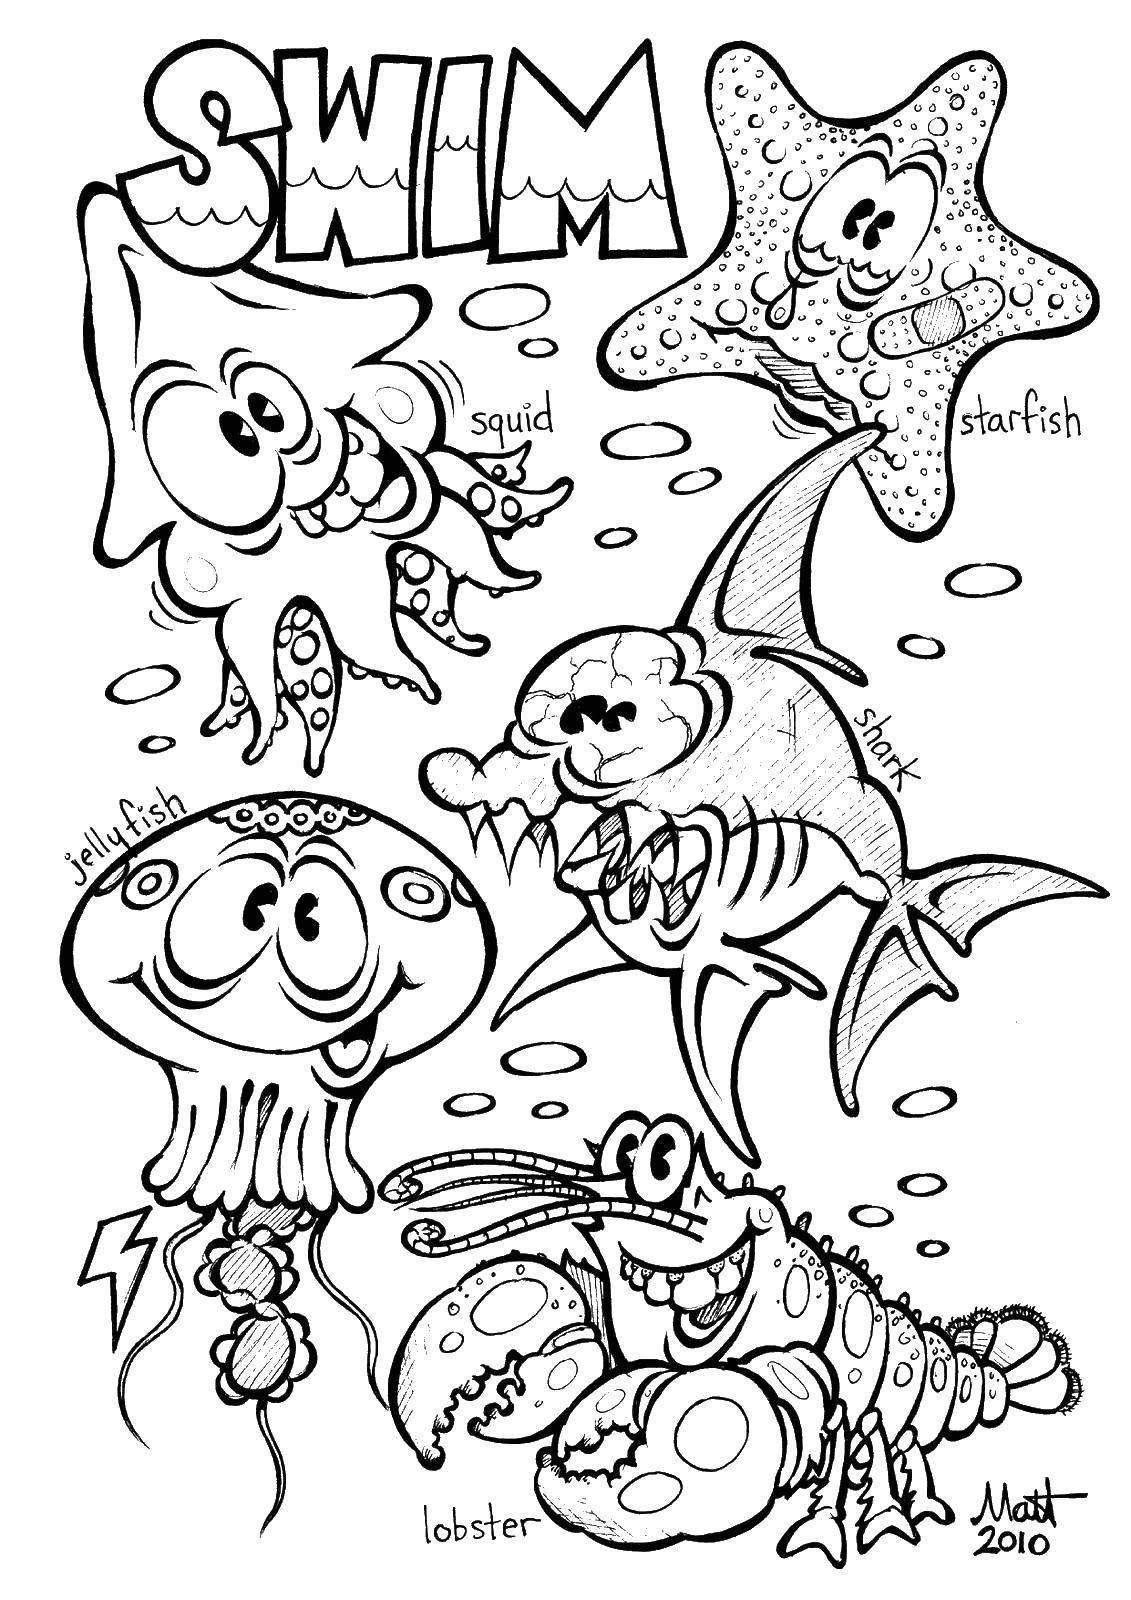 Coloring The water people. Category animals. Tags:  marine animals, water, sea, fish.